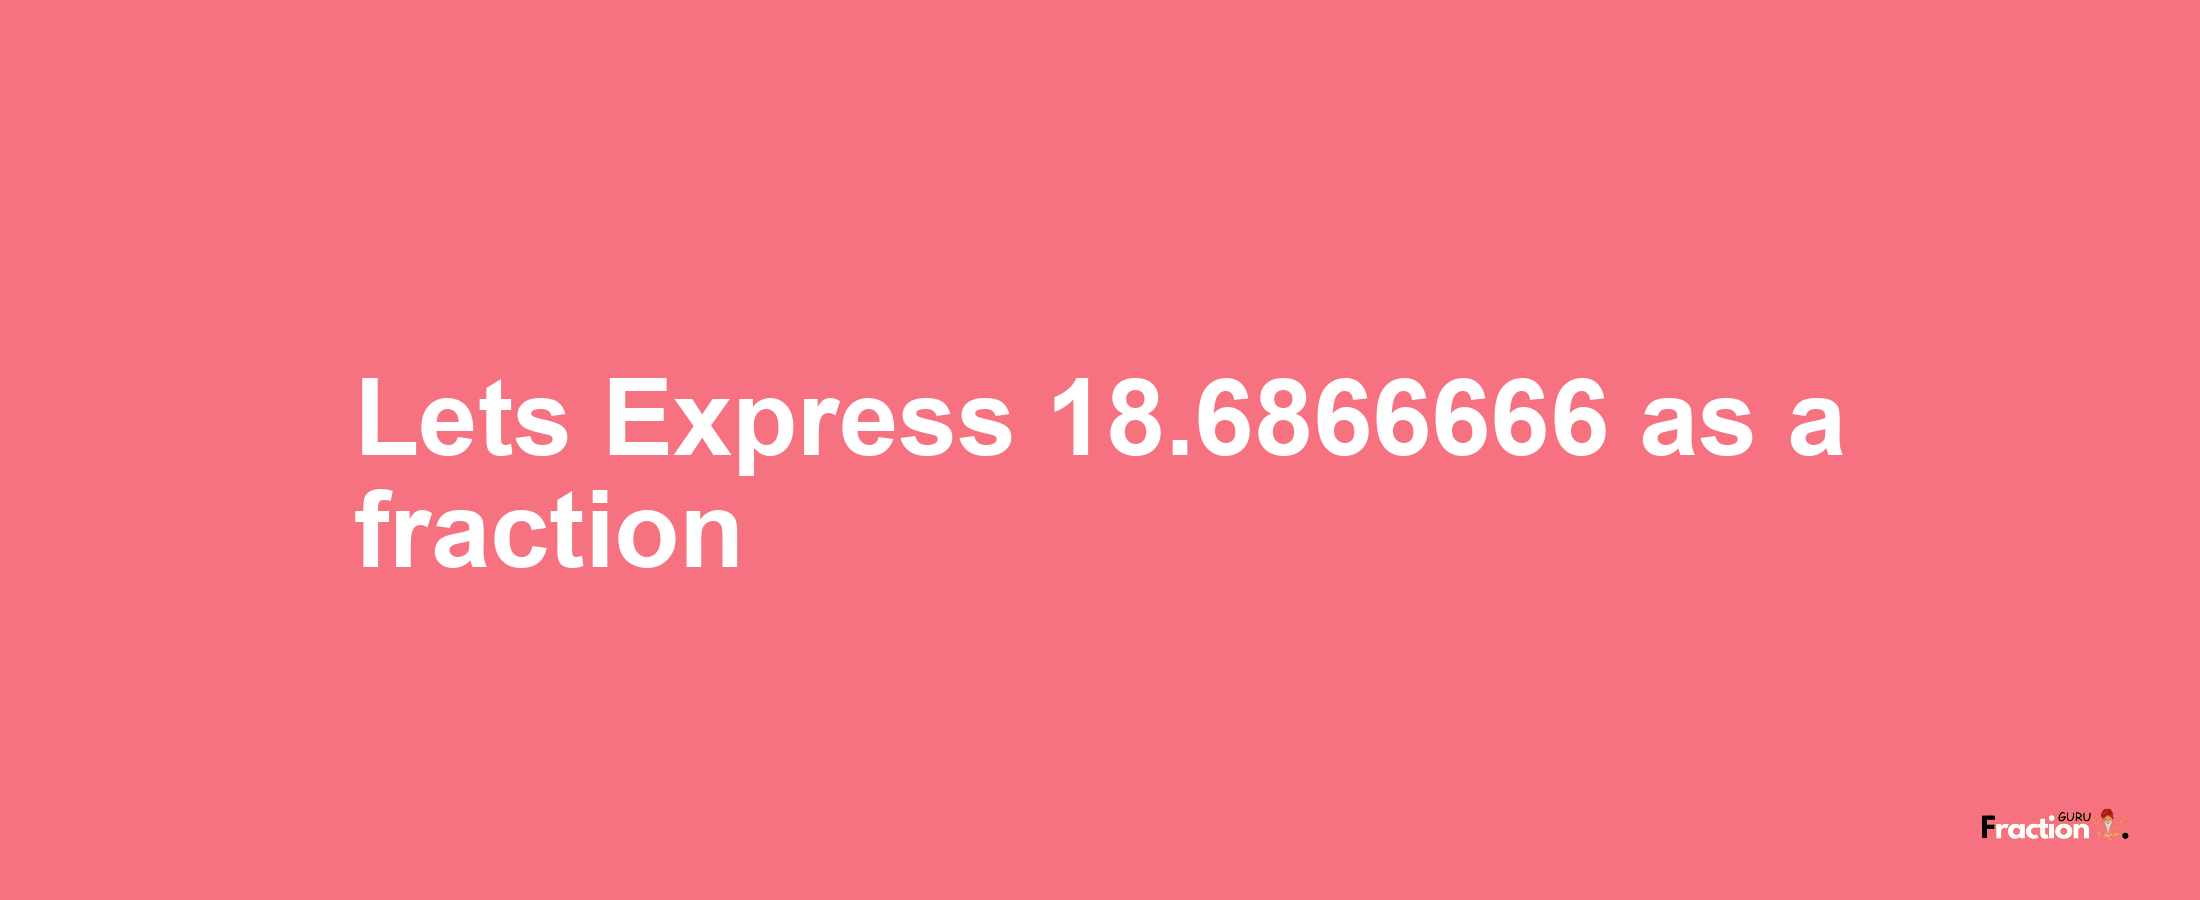 Lets Express 18.6866666 as afraction